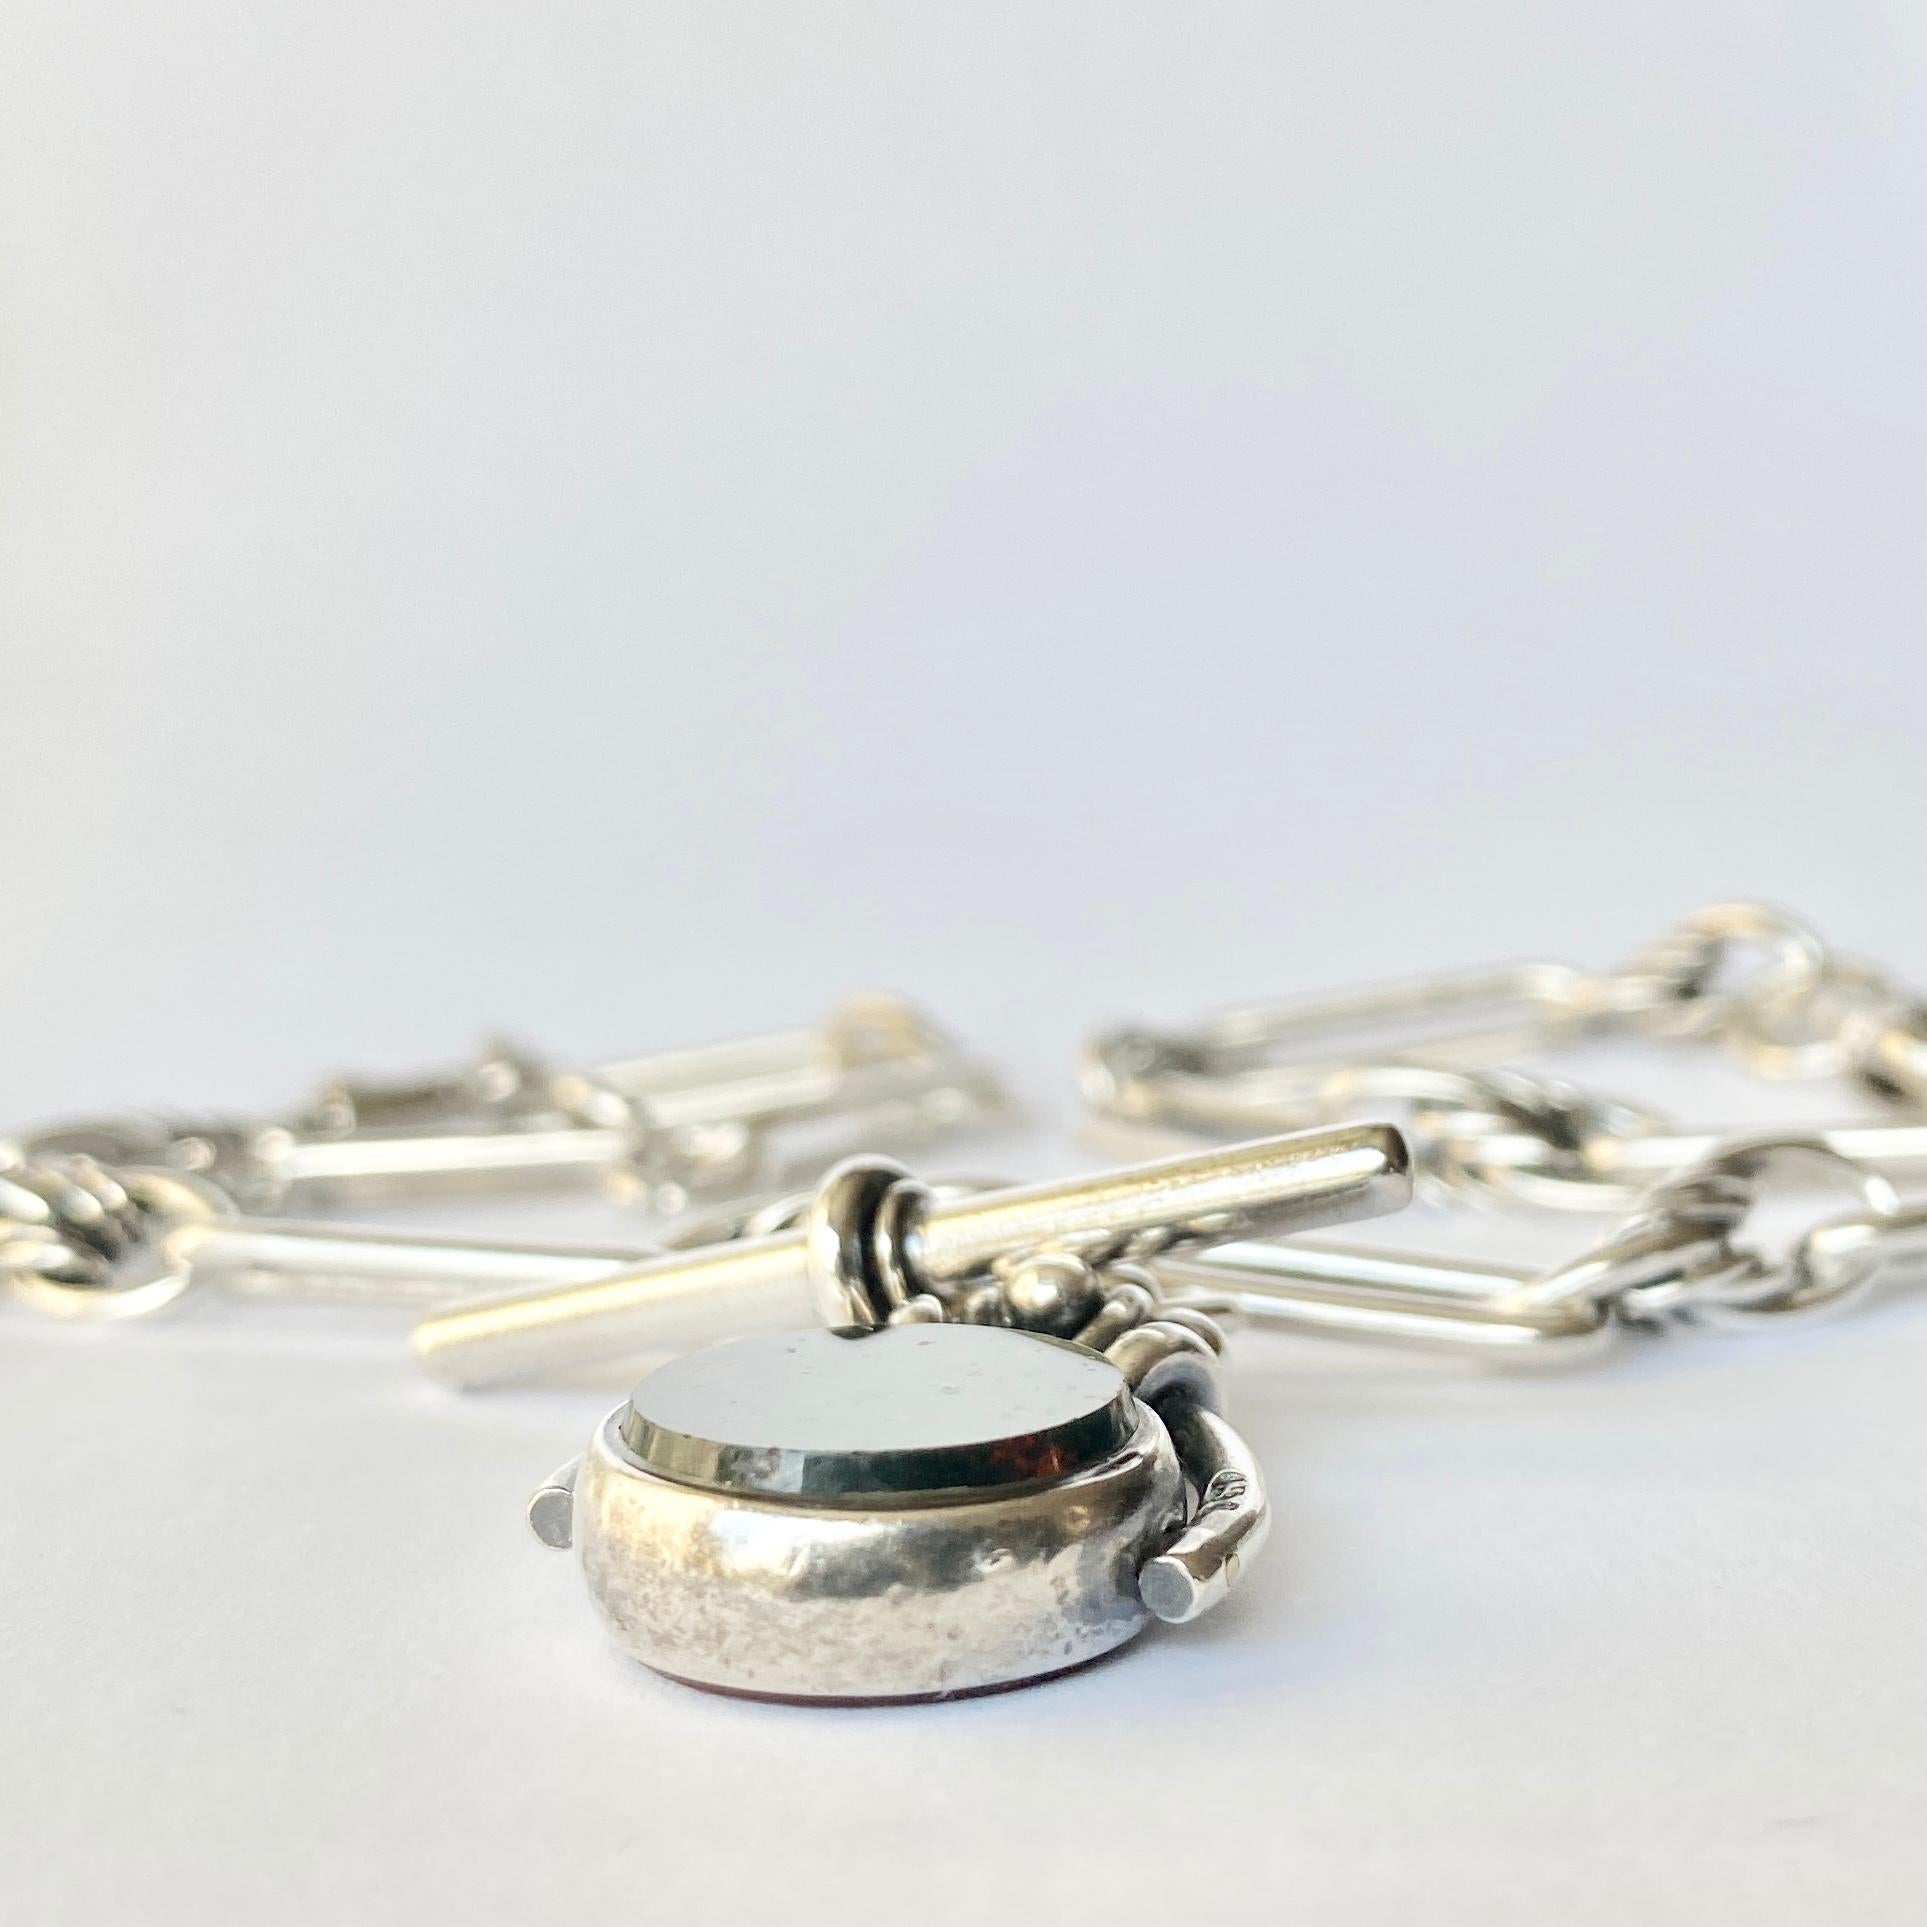 An Albert chain is an essential in any gents wardrobe or makes the perfect necklace. This particular Albert  is made up of trombone links with detailed links in-between. There are two dog clips and it holds a t-bar and fob with bloodstone and